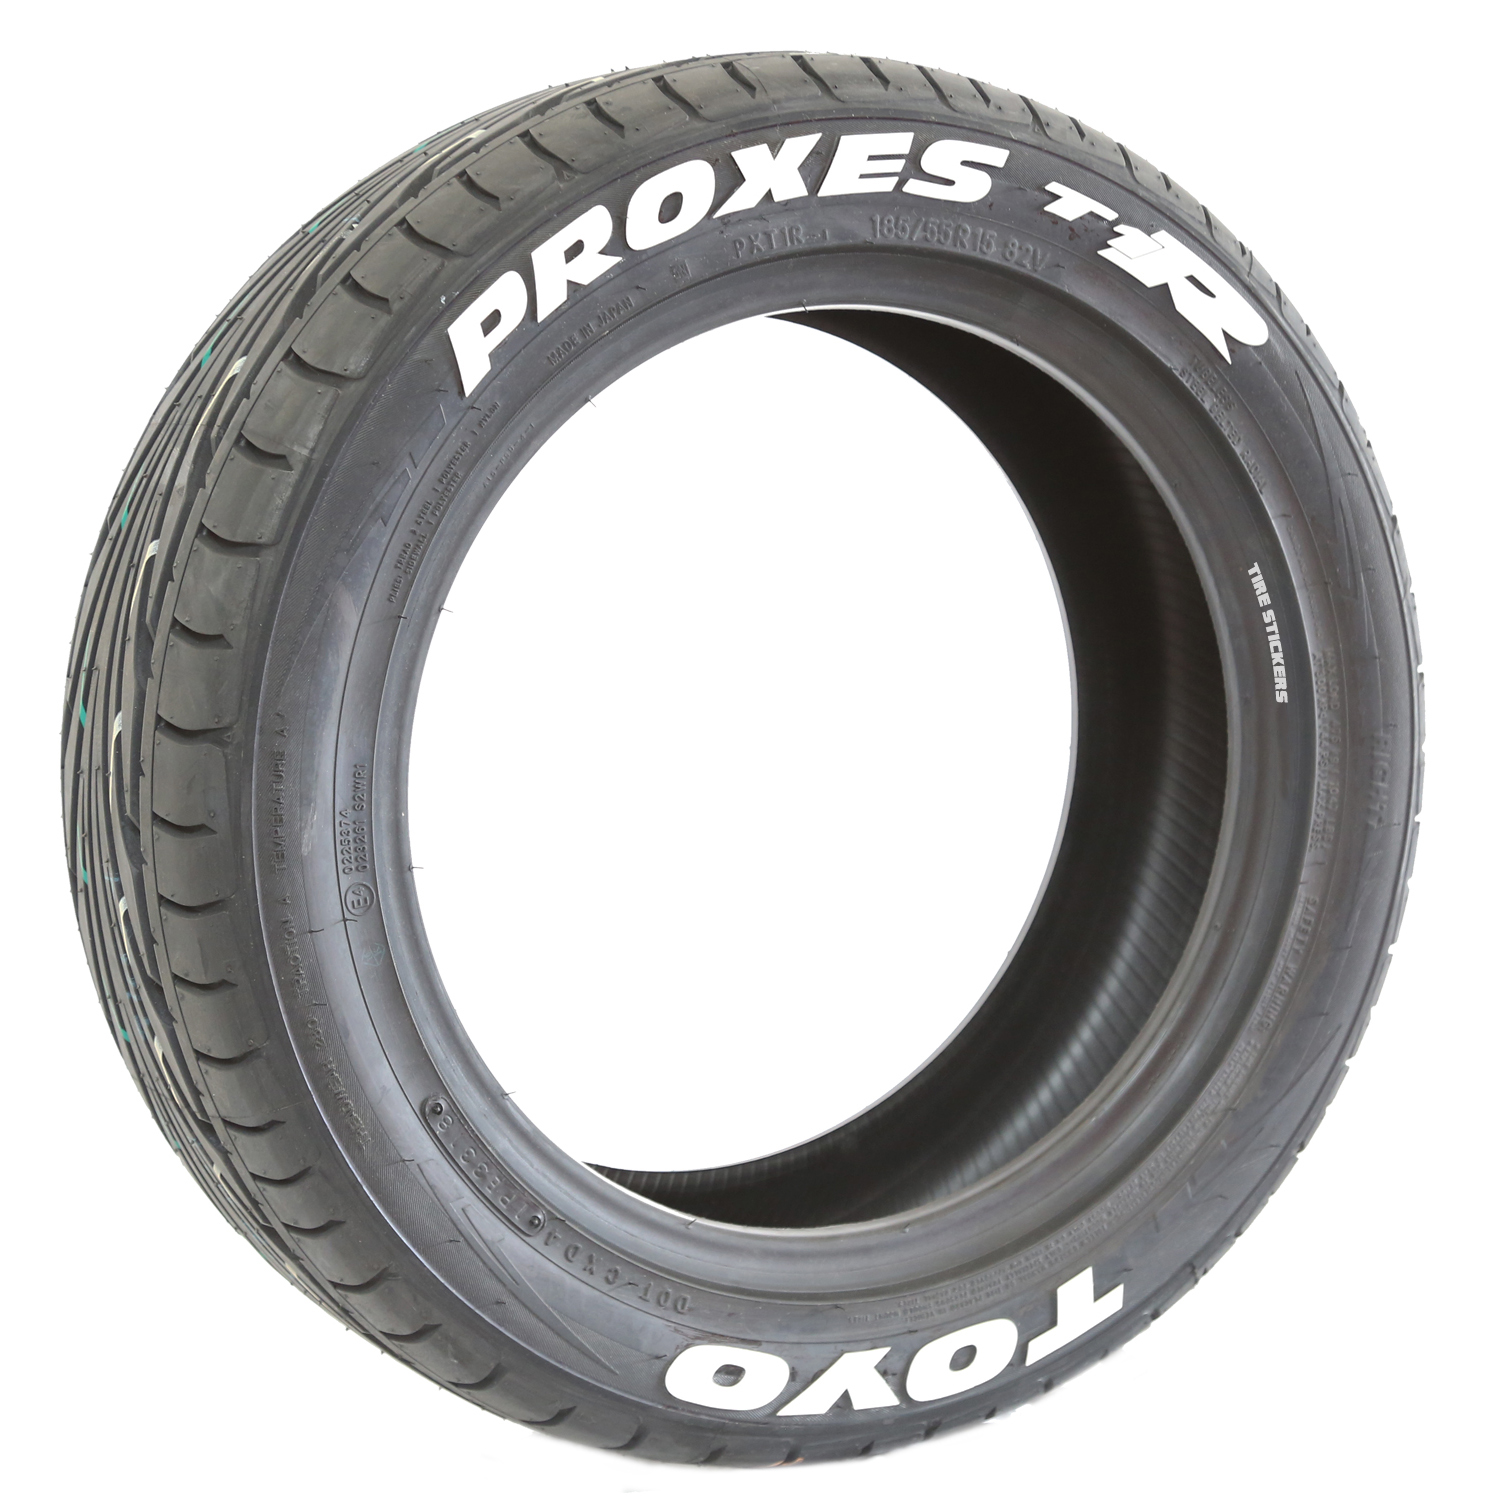 Toyo Tires Proxes T1R White Letter Tire | TIRE STICKERS .COM